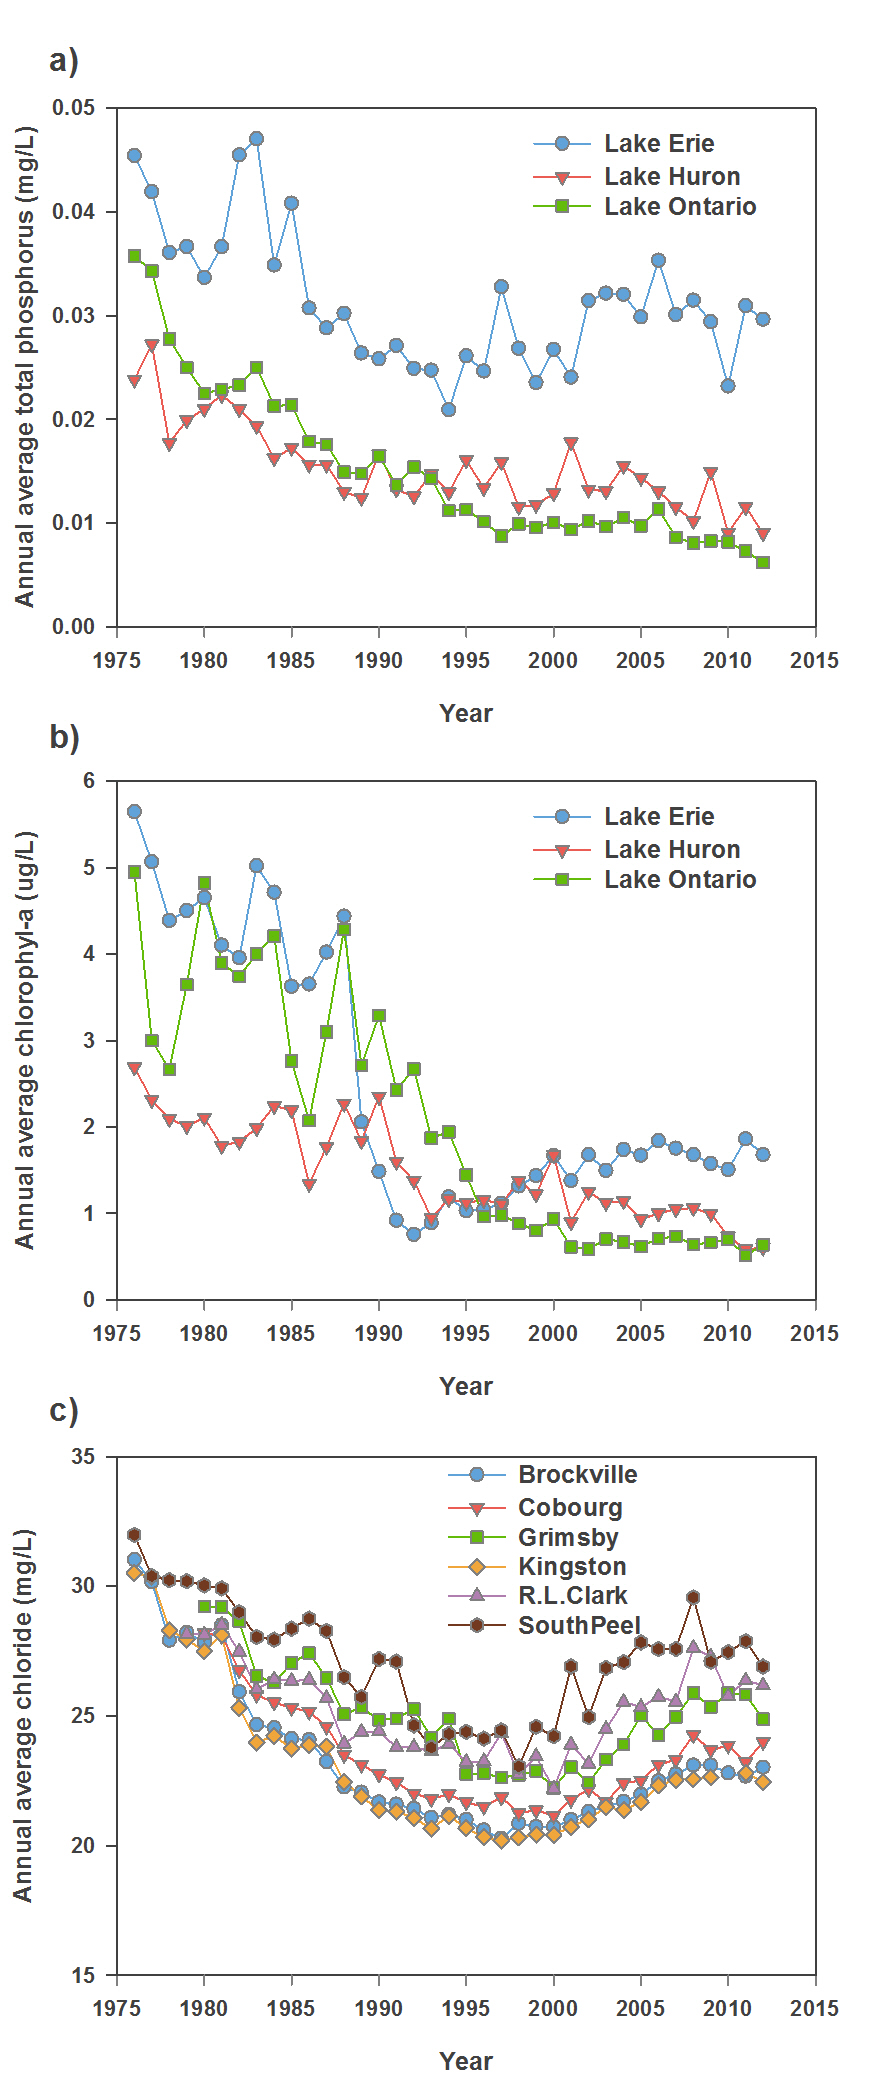 Figure 3: Graphs a and b show the annual average total phosphorus (a) and the annual average chlorophyll-a (b) at monitored locations in Lakes Erie, Huron and Ontario, from 1976-2012. Levels were elevated in the 1970s, and decreased significantly between the 1970s and 1990s. In Lake Erie, levels of phosphorus and chlorophyll have increased in recent years. Graph c) shows annual average chloride concentrations at six locations in Lake Ontario, from 1976-2012. Locations include Brockville, Cobourg, Grimbsby, Kingston, R. L. Clark, and South Peel. Chloride levels were elevated Lake Ontario in the 1970s, then decreased between the mid-1970s and 1995, but levels have been increasing in Lake Ontario since the mid-1990s.